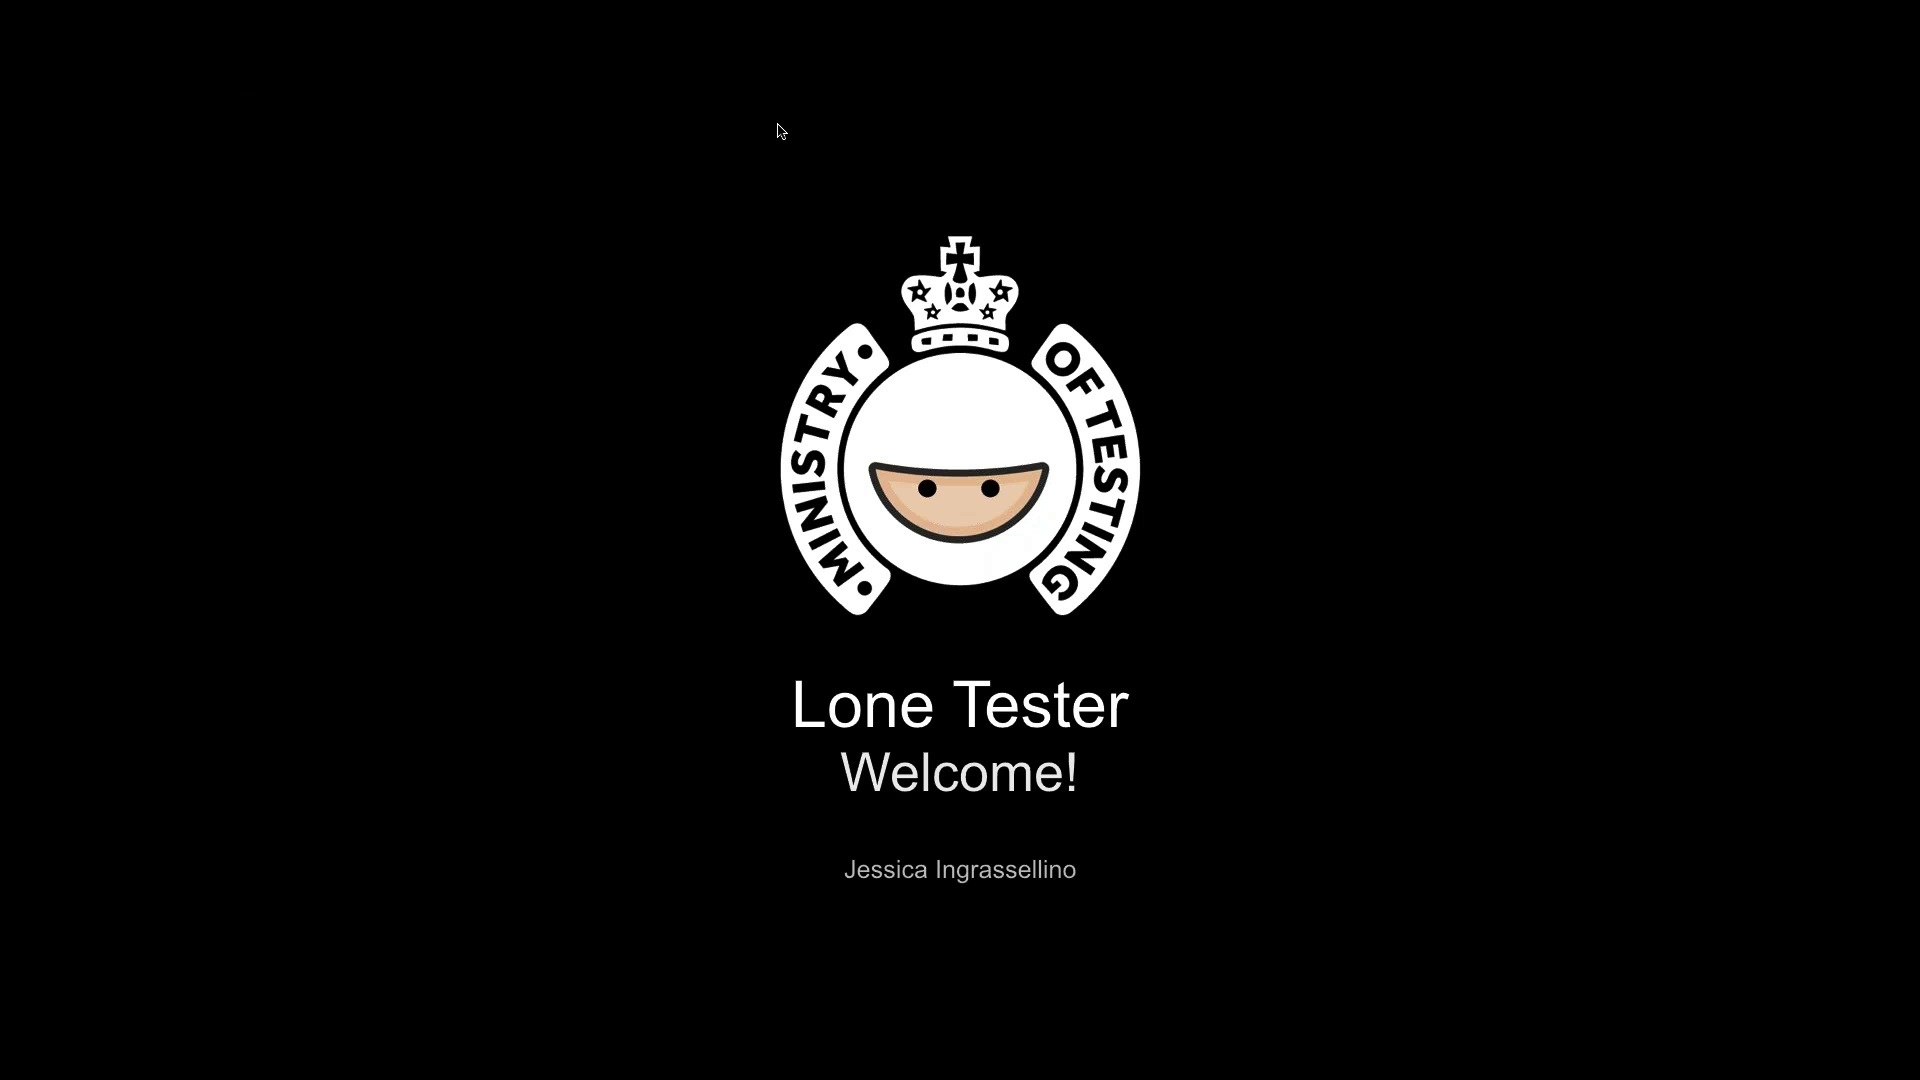 The Lone Tester